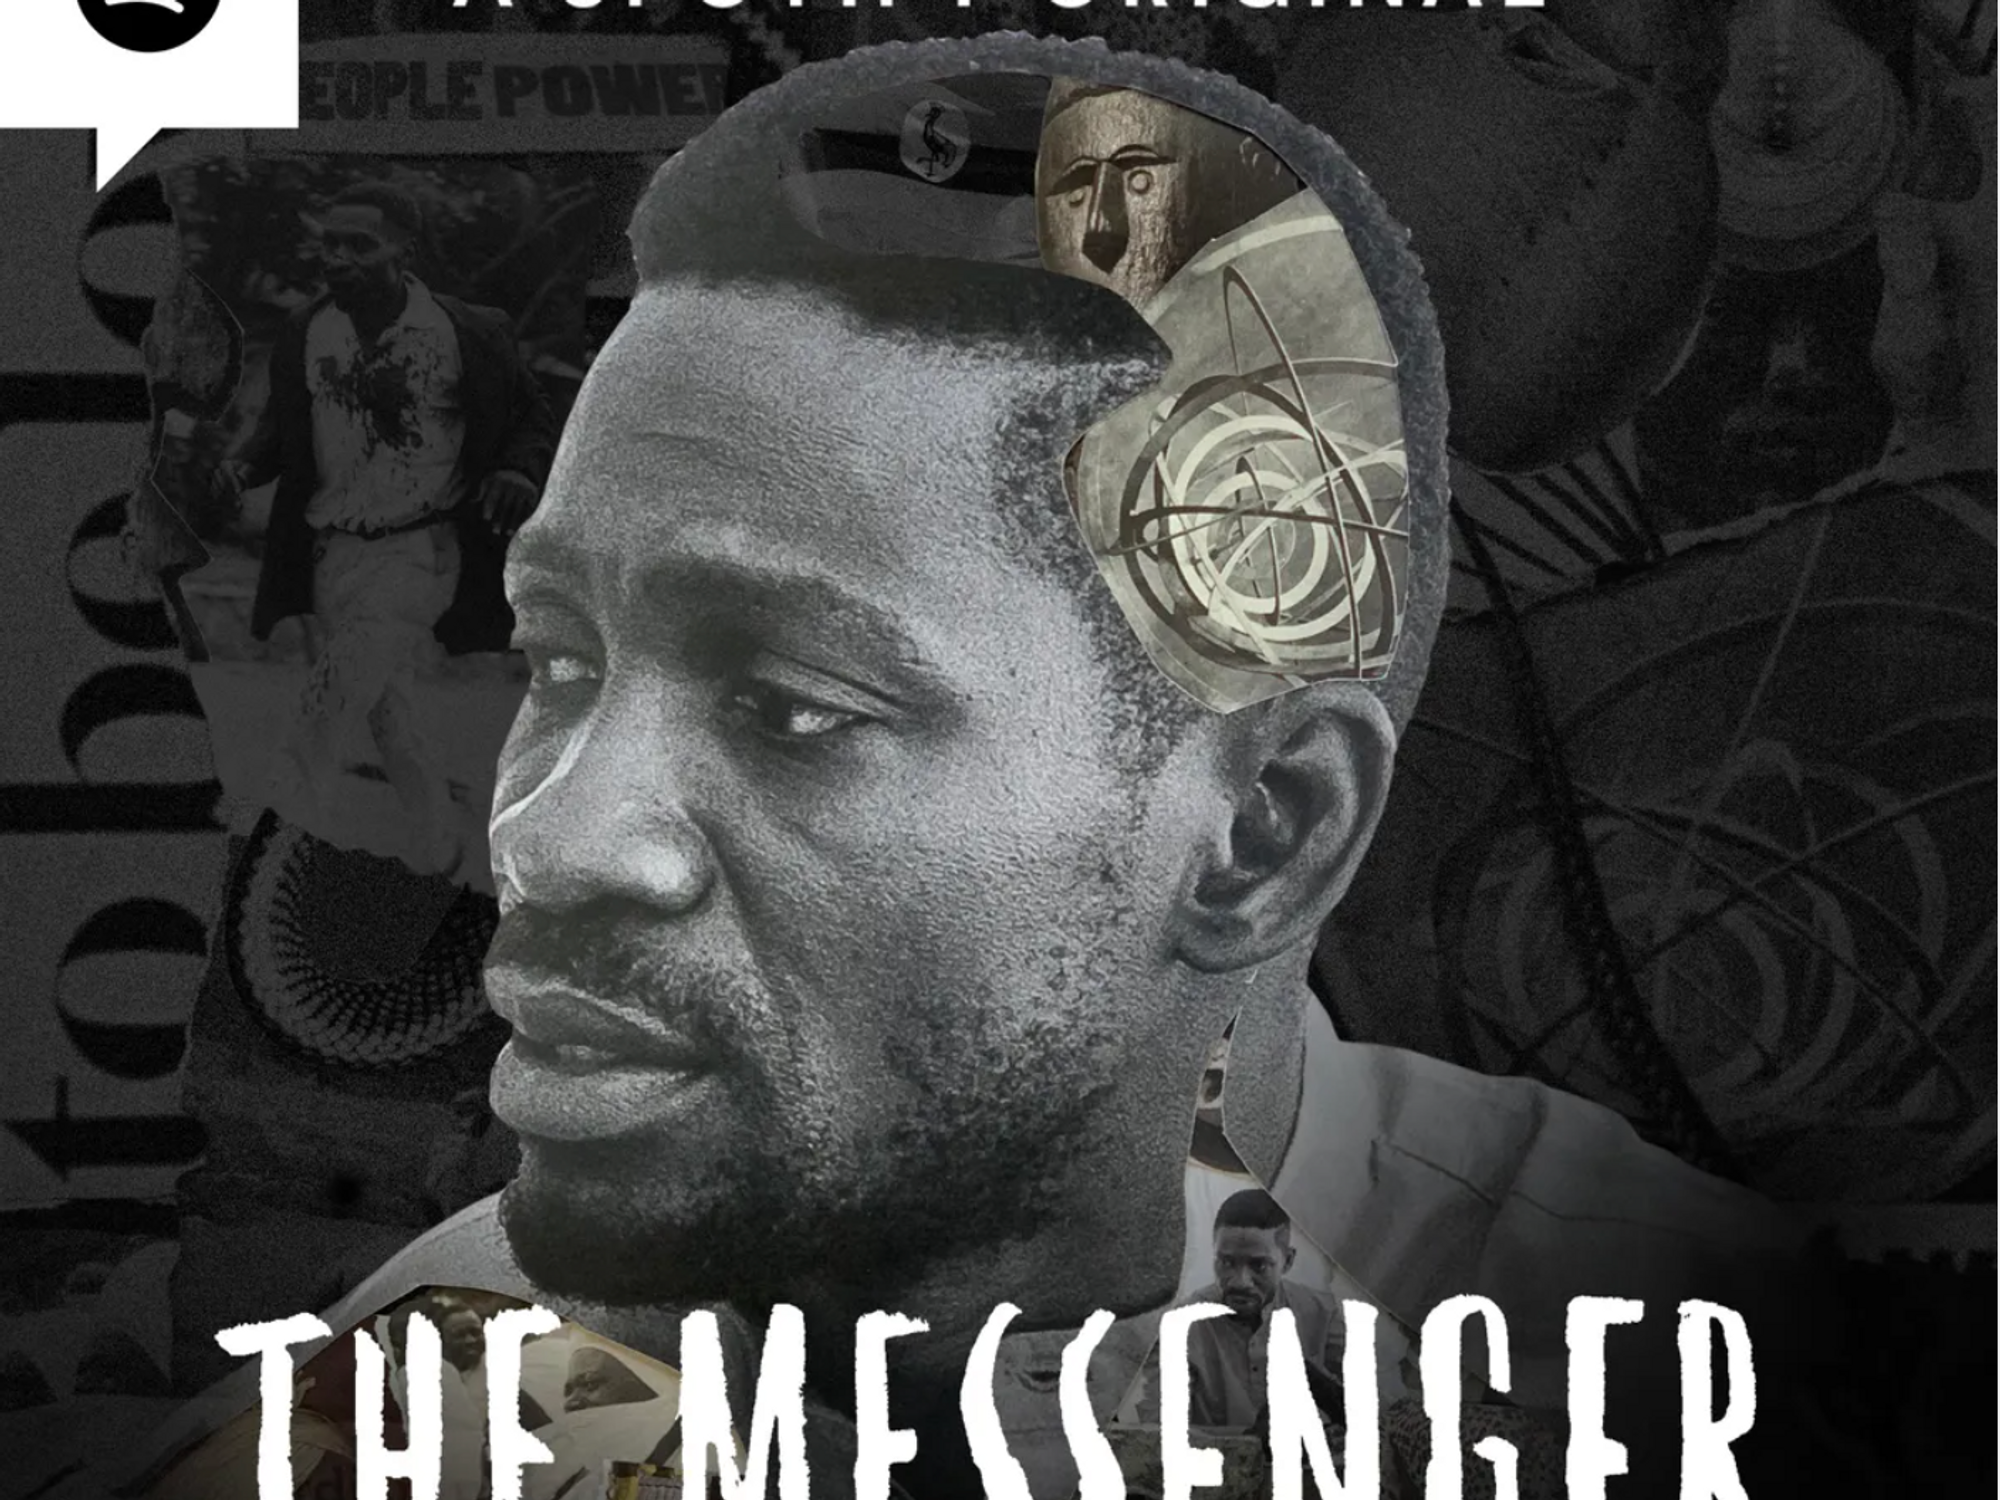 Bobi Wine's Release Detailed in Latest Episode of 'The Messenger'